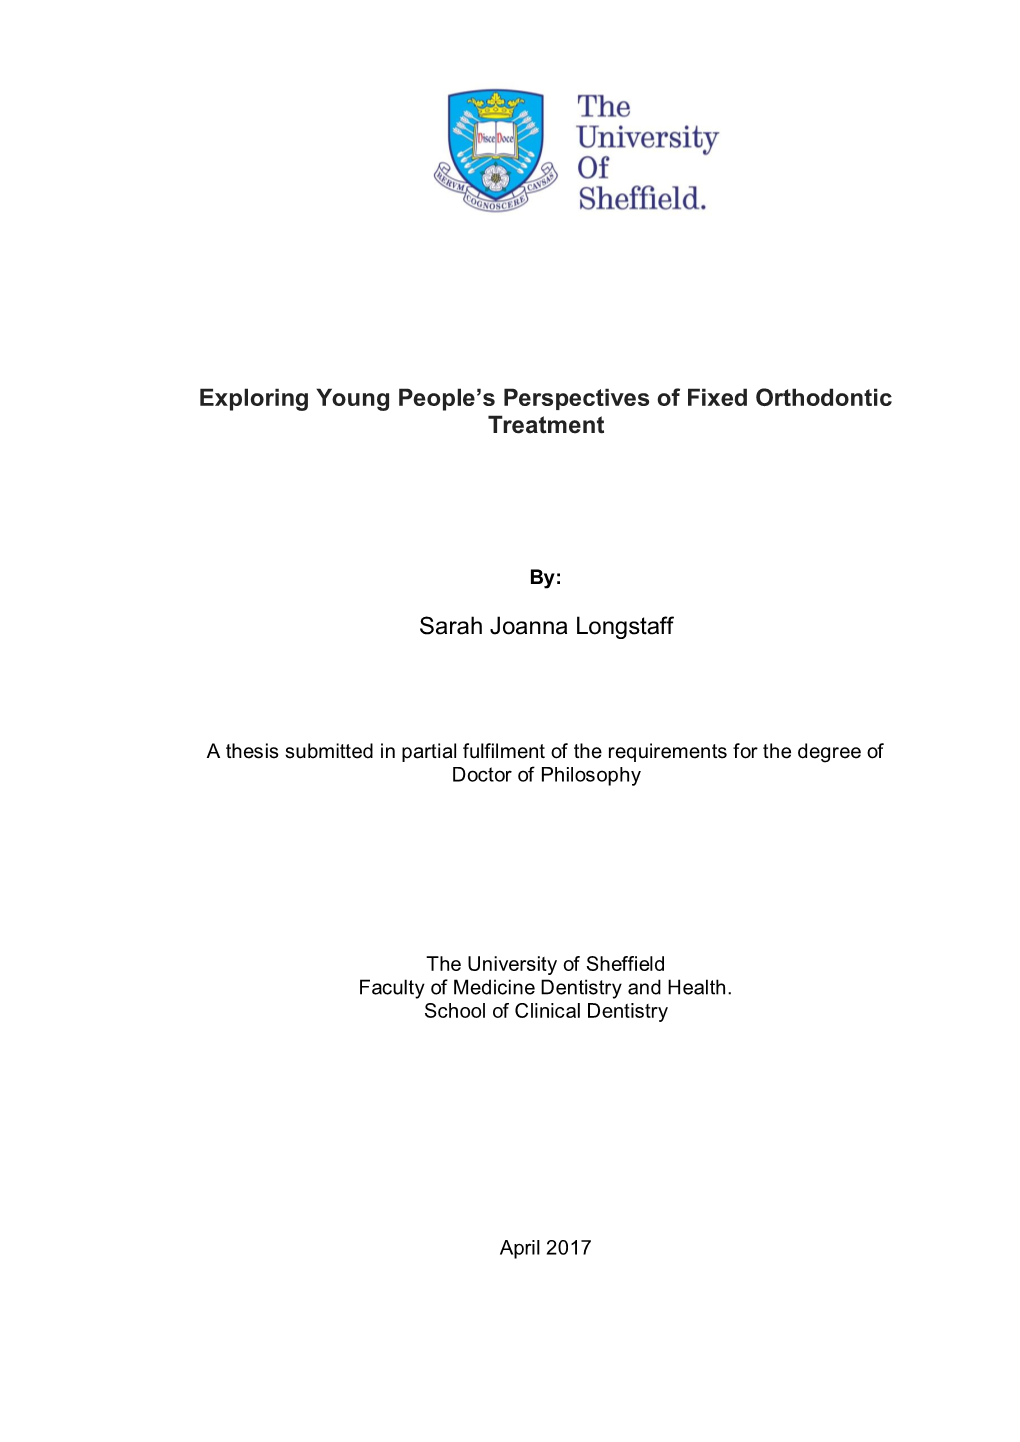 Exploring Young People's Perspectives of Fixed Orthodontic